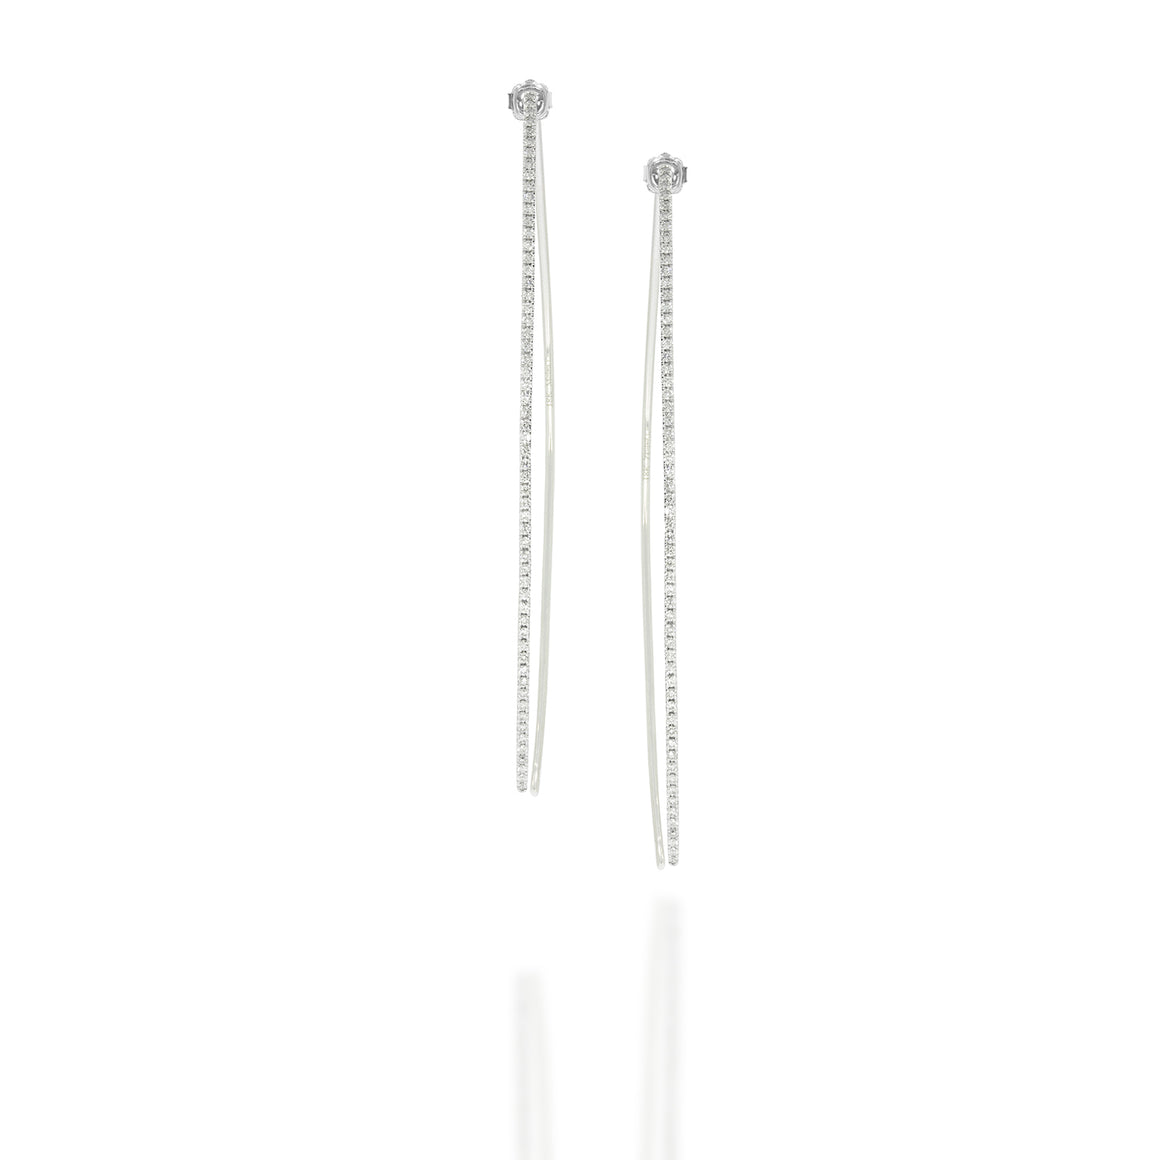 One Strip Drop Diamonds Earrings. Dangle Drop Diamond Earring. 0.56 carat in 18K white gold. perfect for weeding party. Simple and elegant.